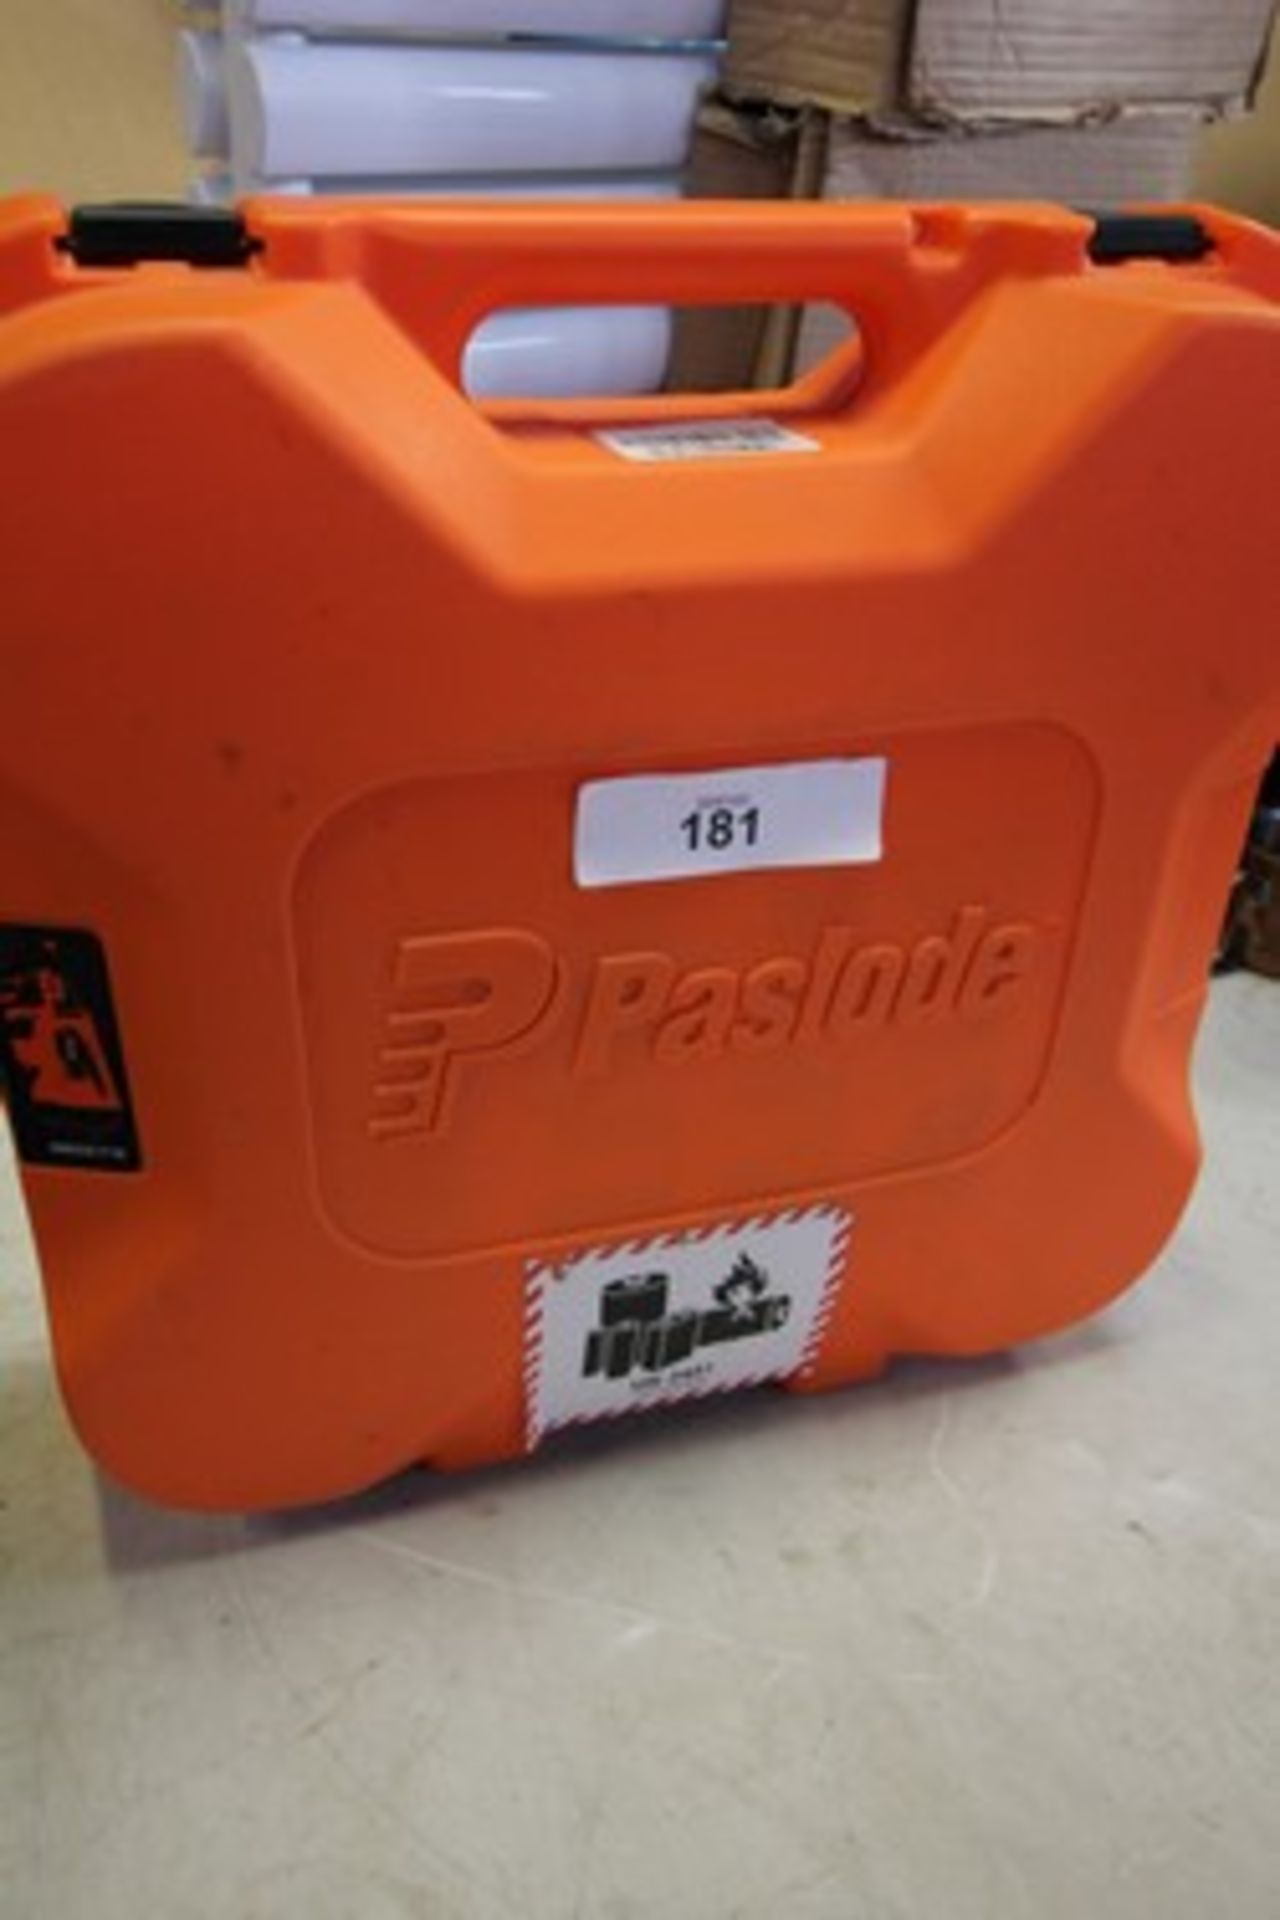 1 x Paslode impulse IM65A F16 Nail Gun with battery charger and case, Loose back plate mountings, - Image 3 of 3